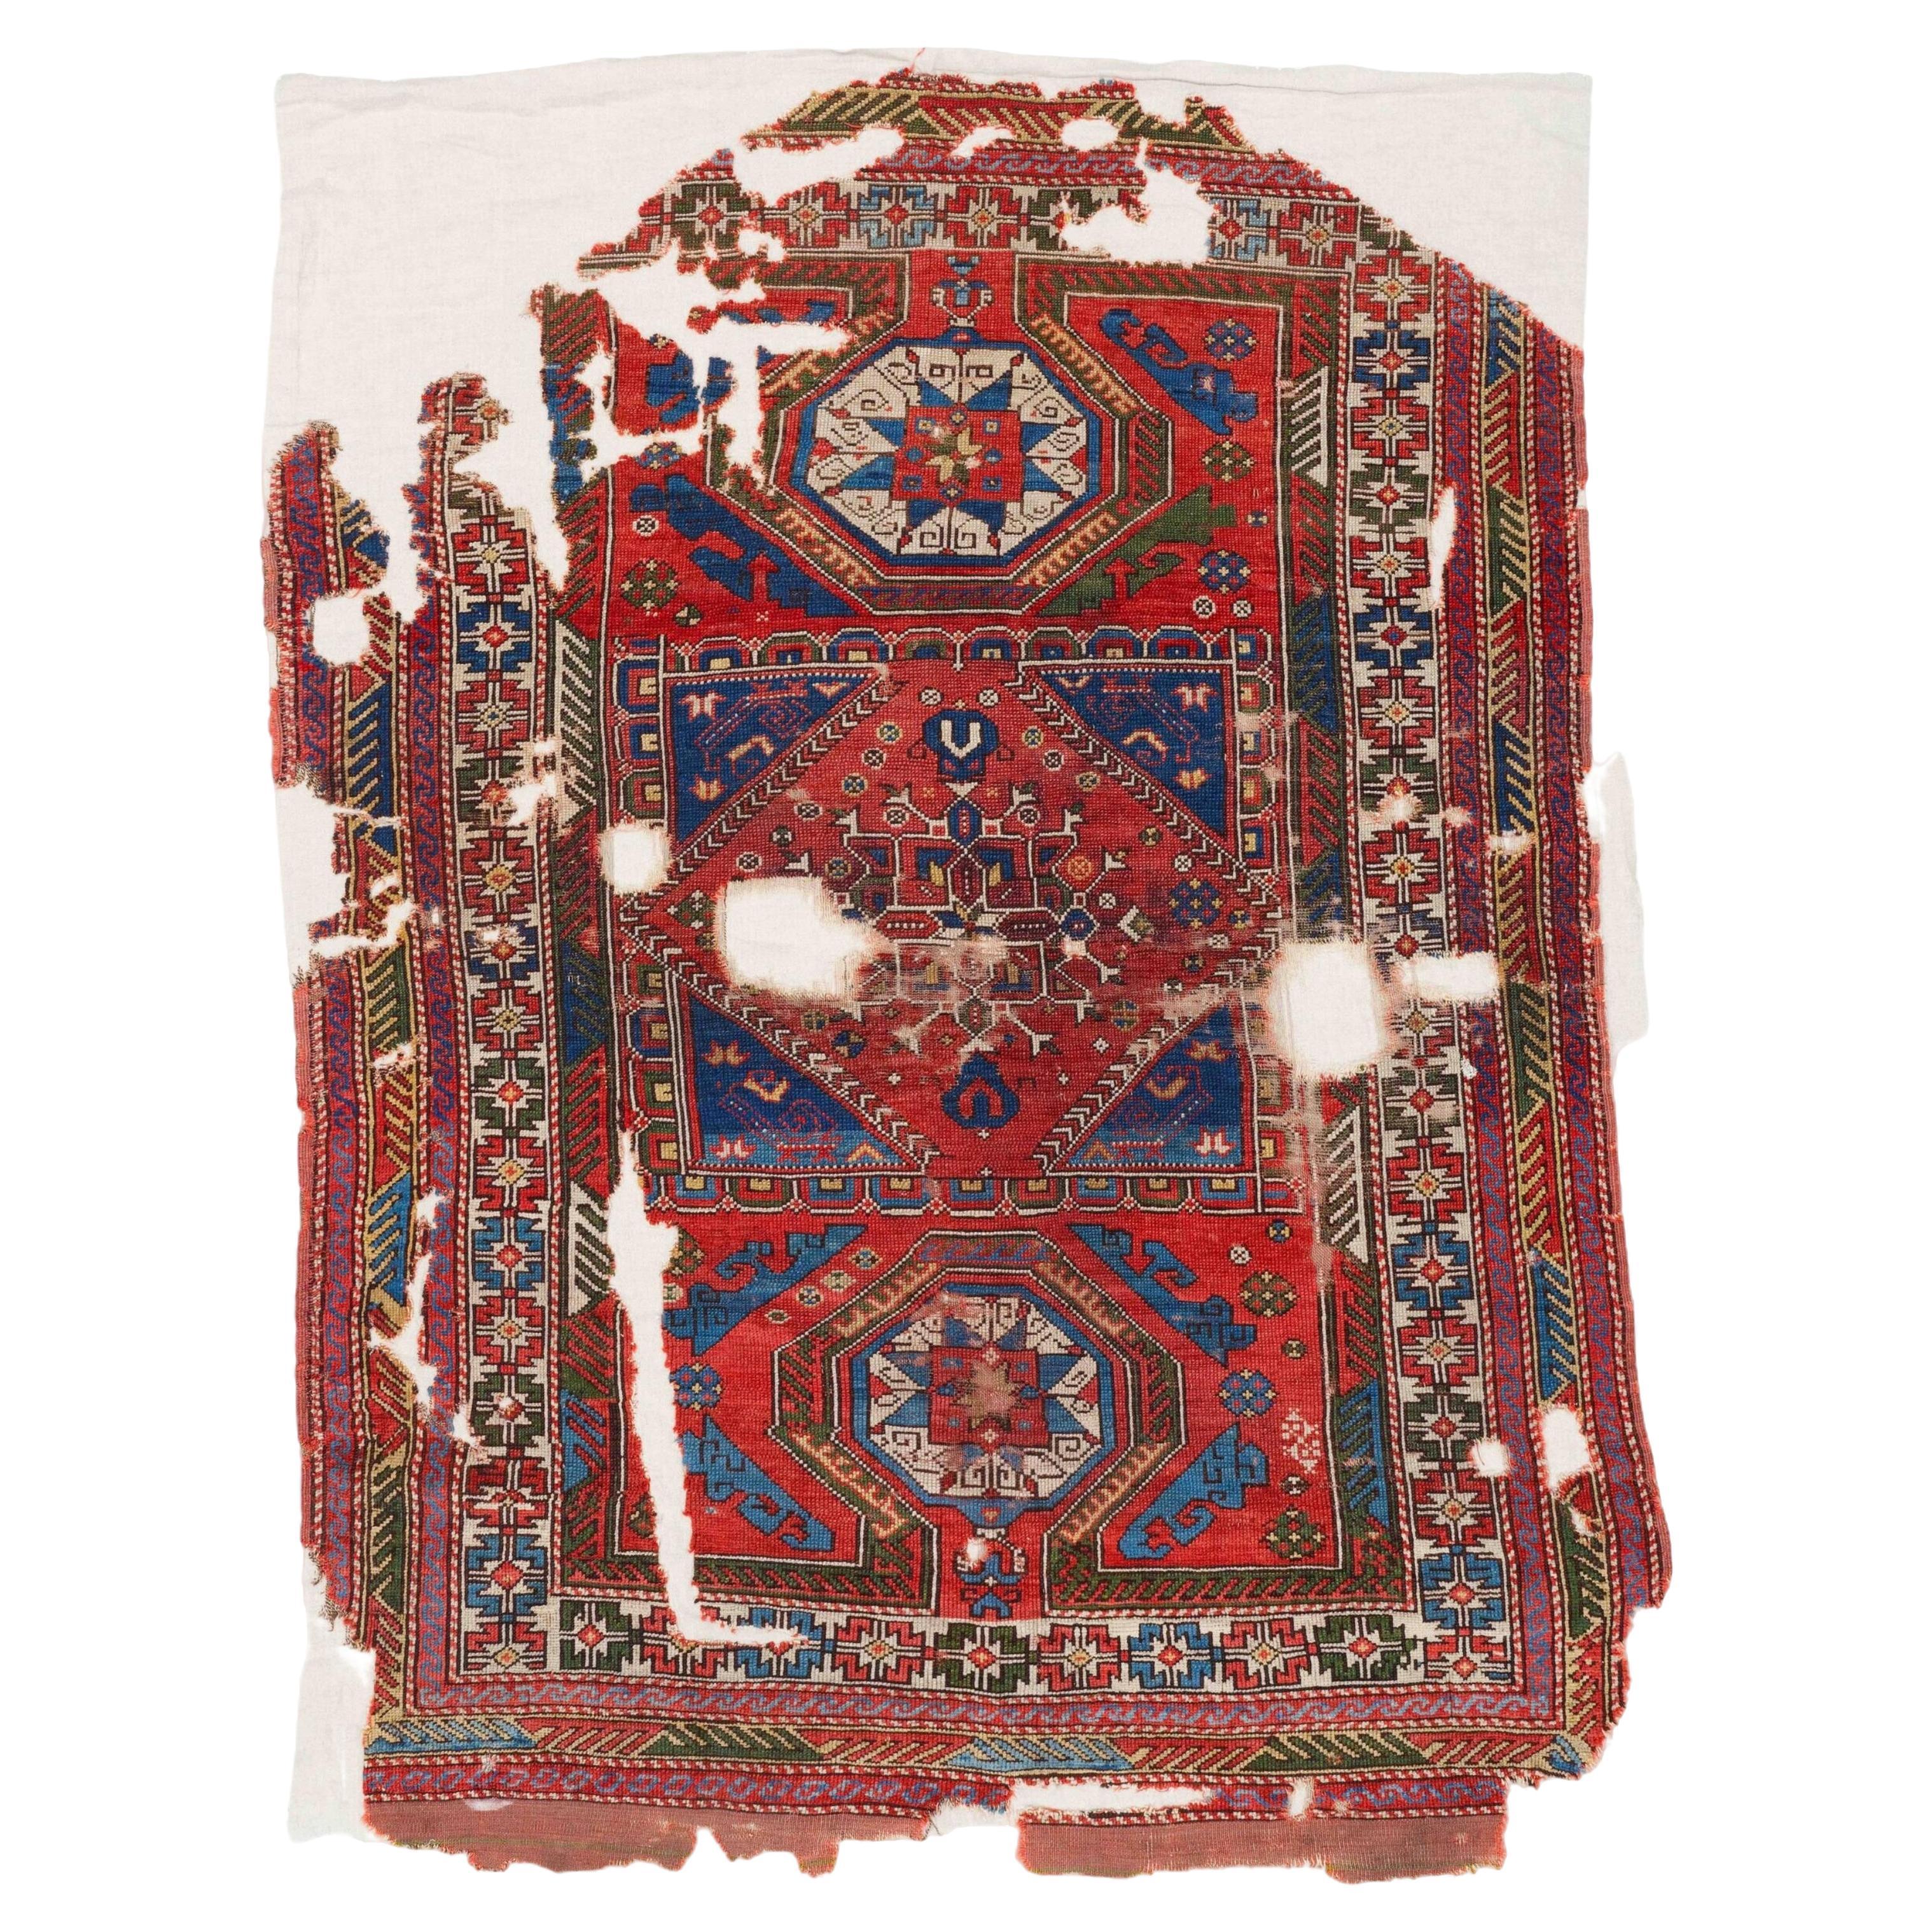 Early 18th Century Turkish Rugs